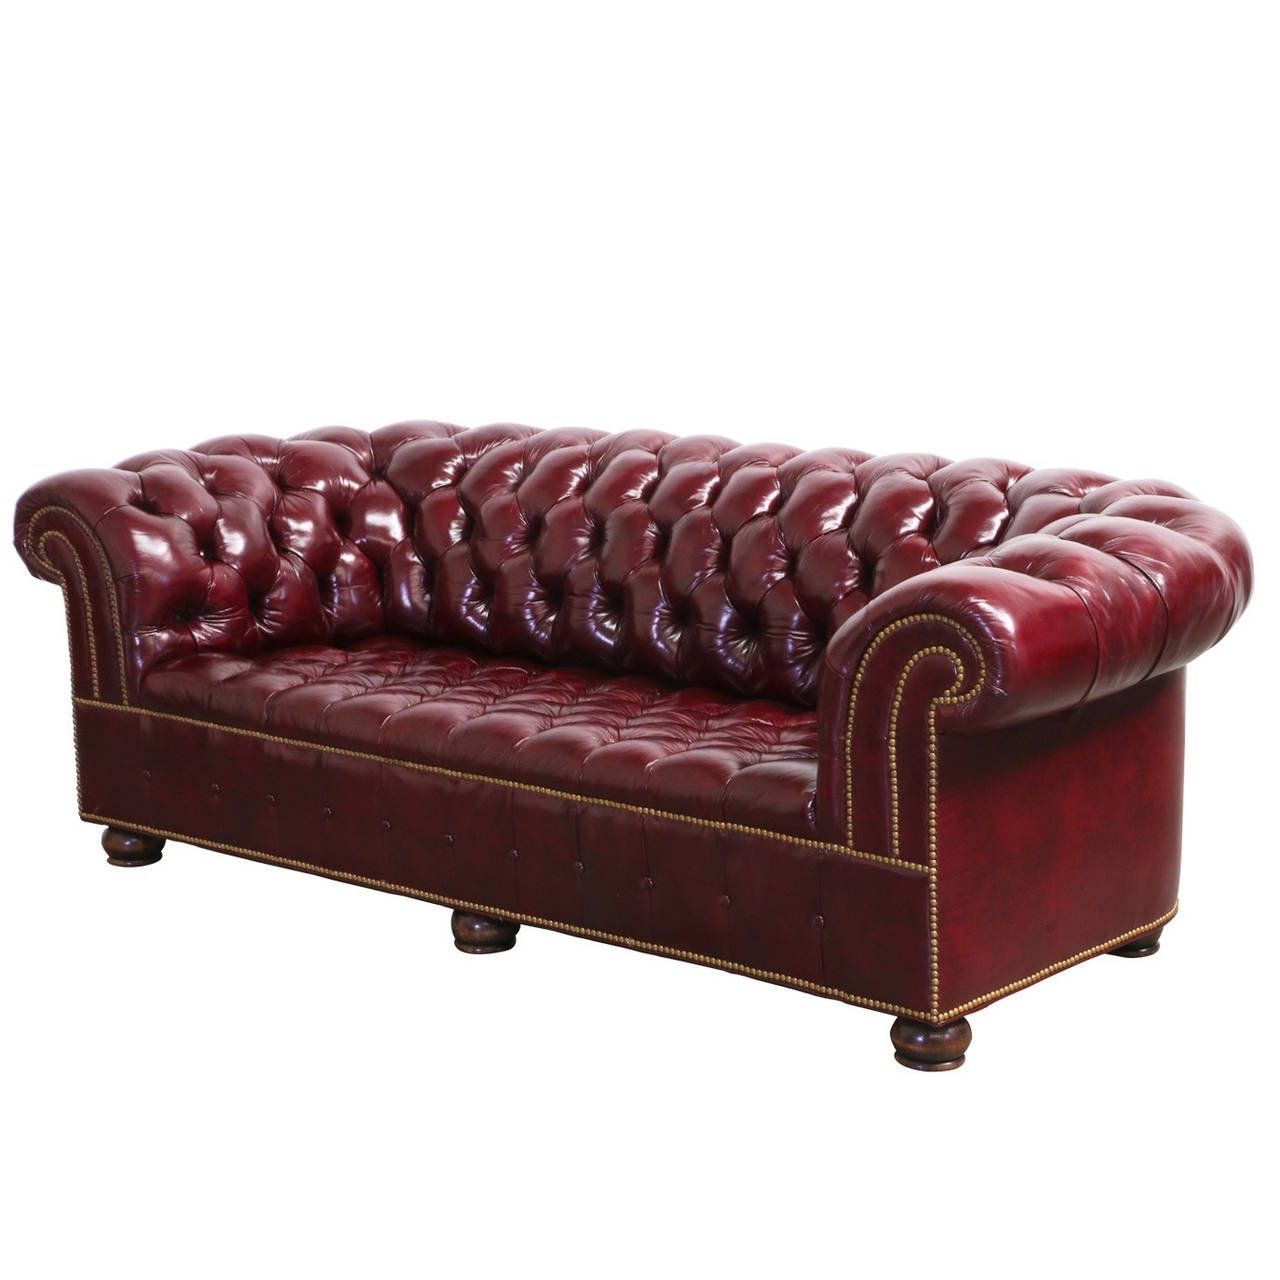 Best And Newest Vintage Chesterfield Sofas Regarding Vintage Burgundy Leather Chesterfield Sofa Ideas (View 5 of 15)